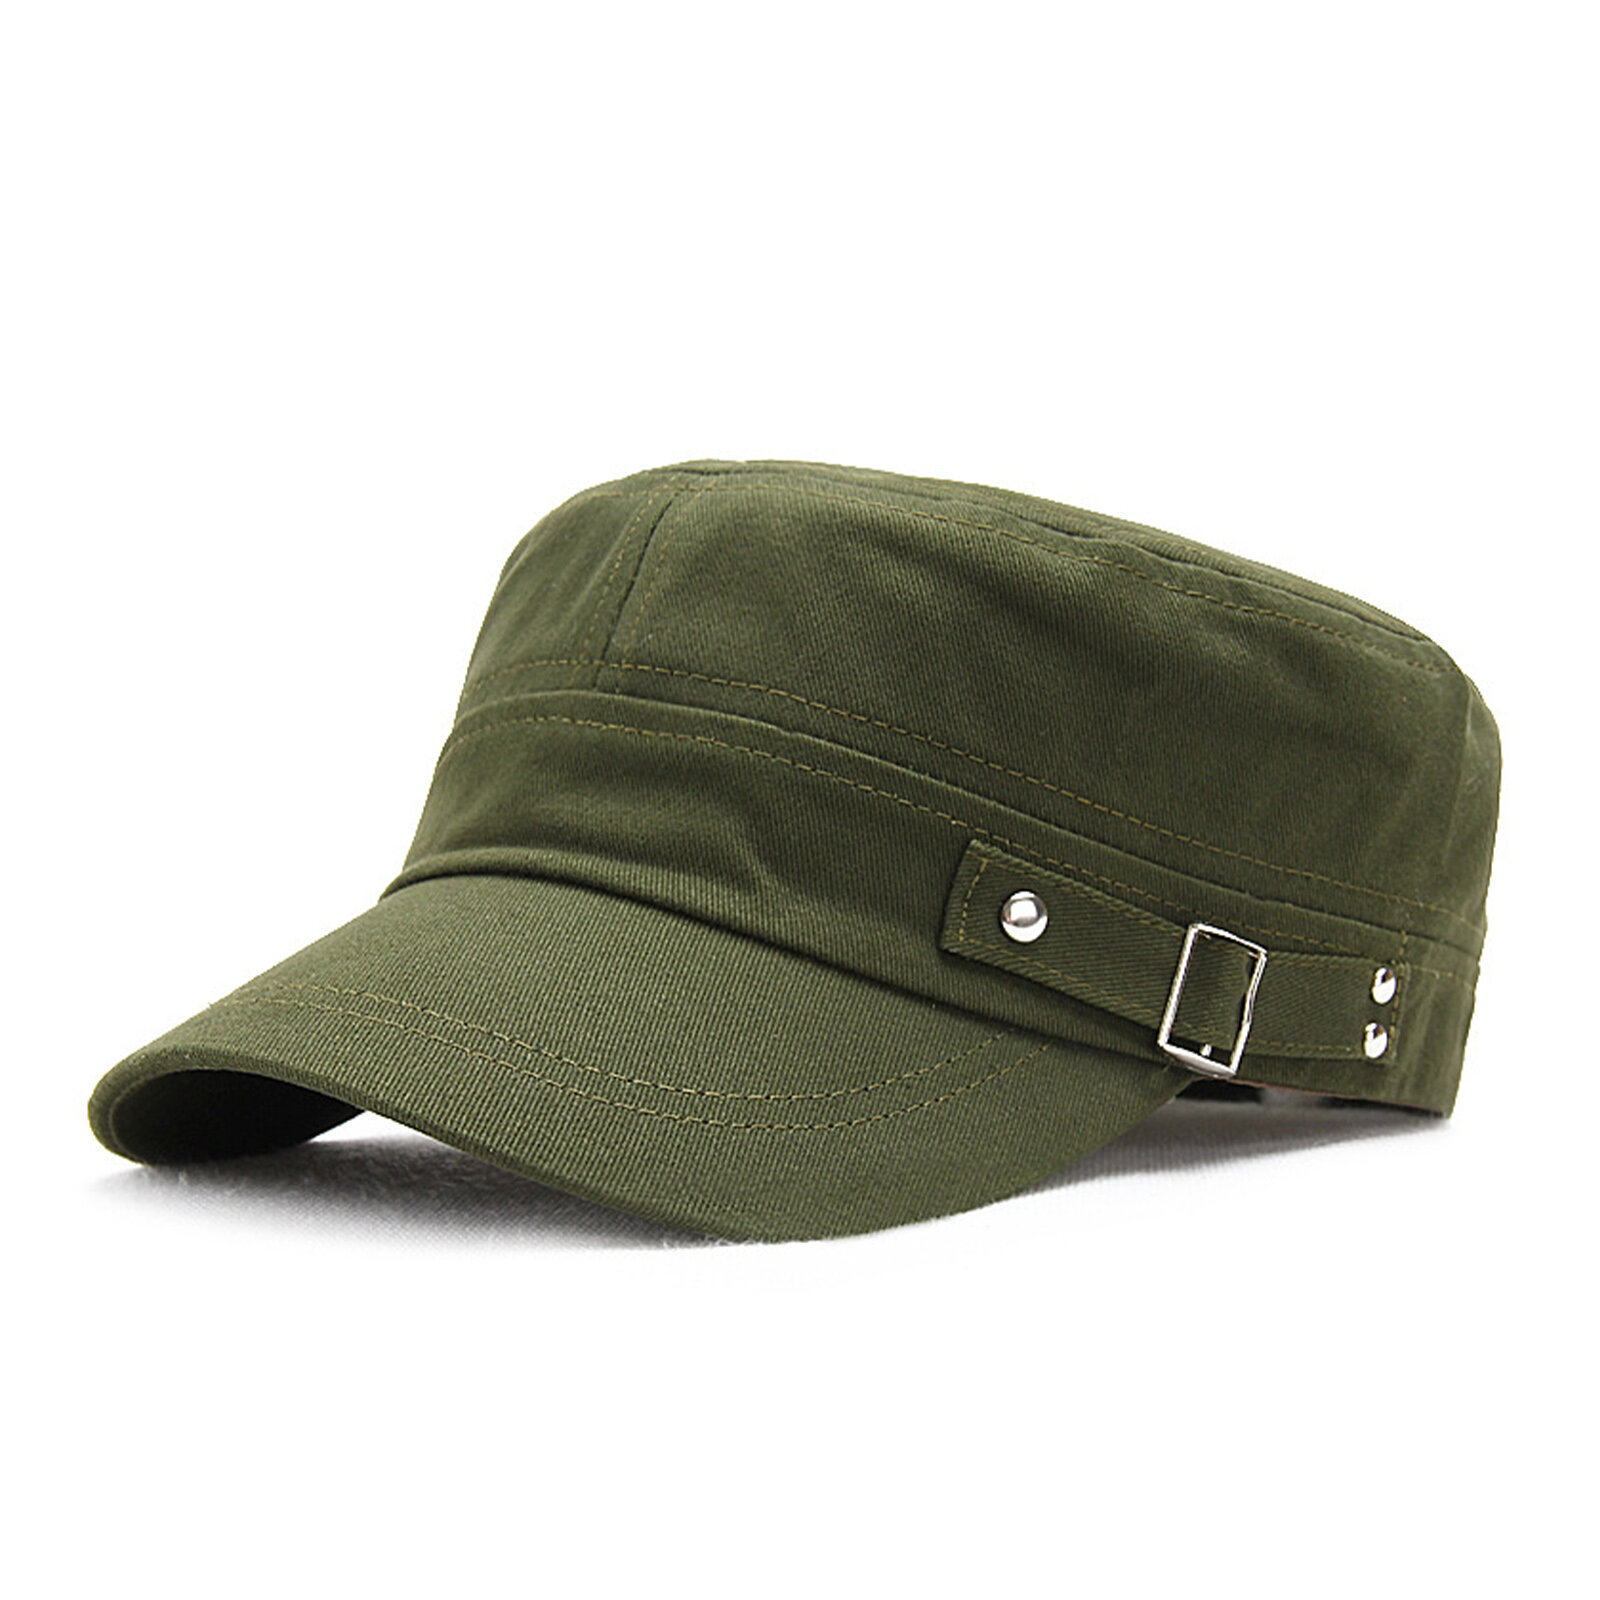 Men Cotton Solid Color Outdoor Sunshade All-match Casual Vintage Military Caps Flat Hats